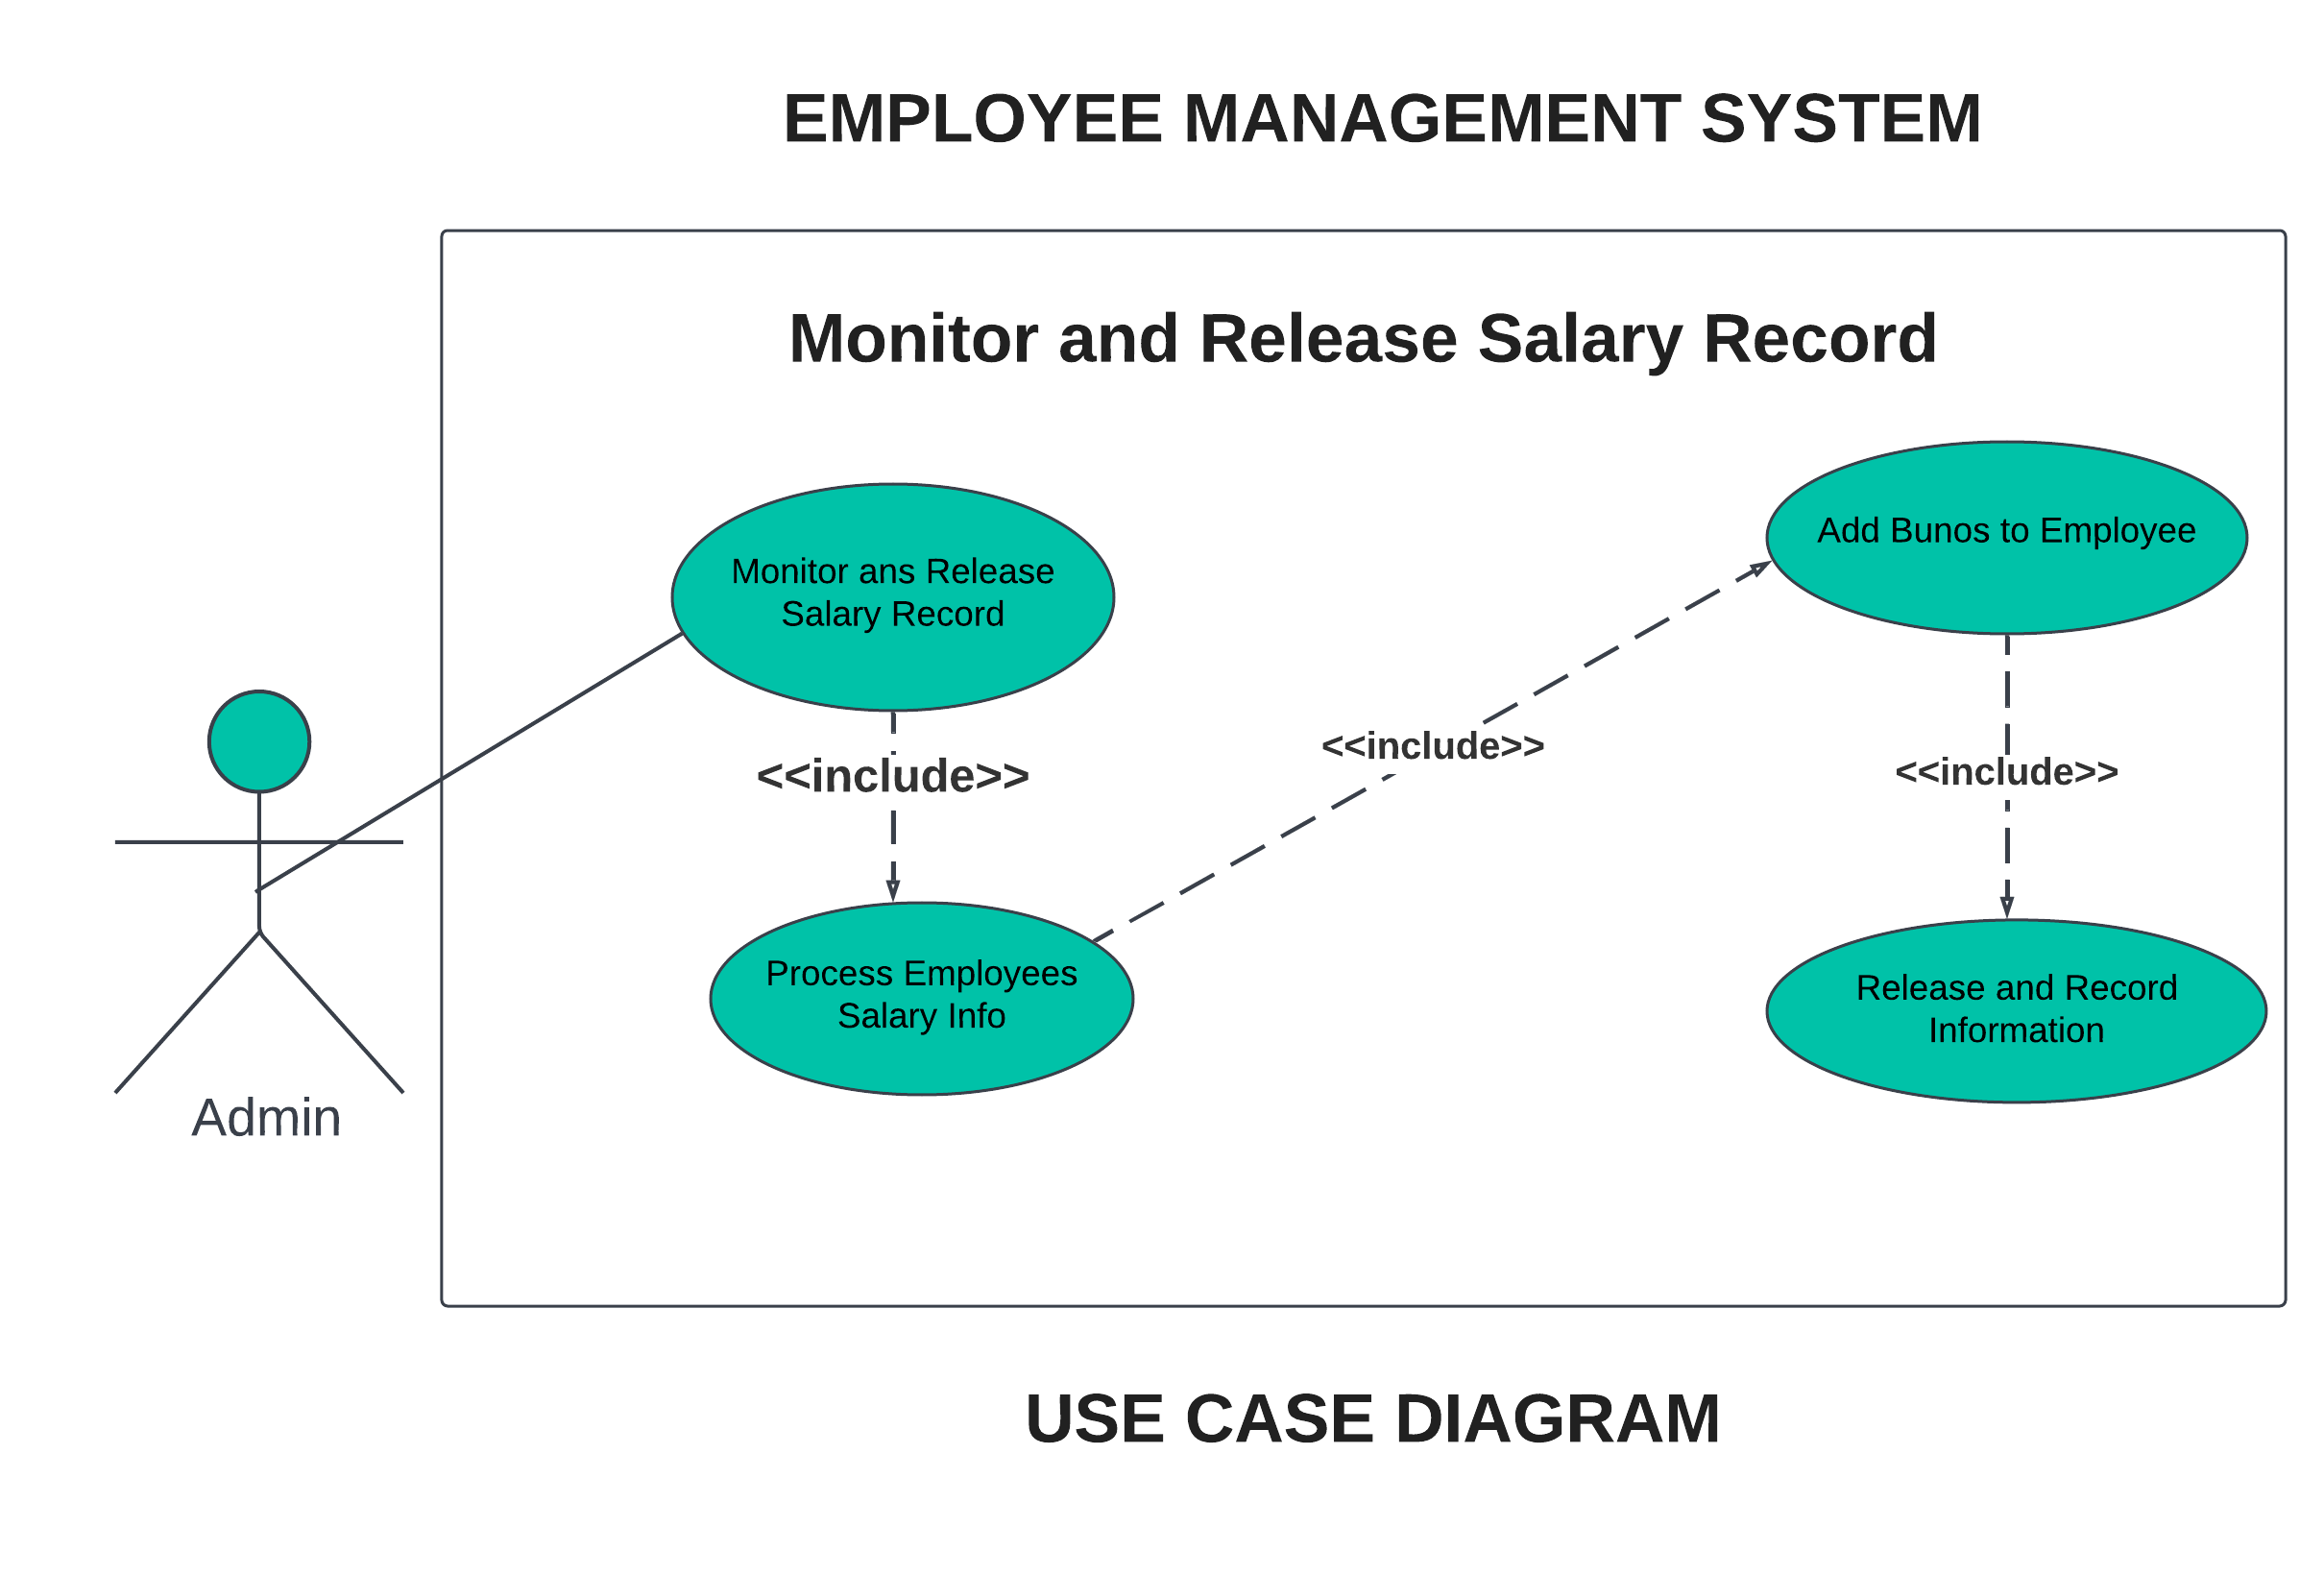 MONITOR AND RELEASE SALARY RECORD USE CASE DIAGRAM